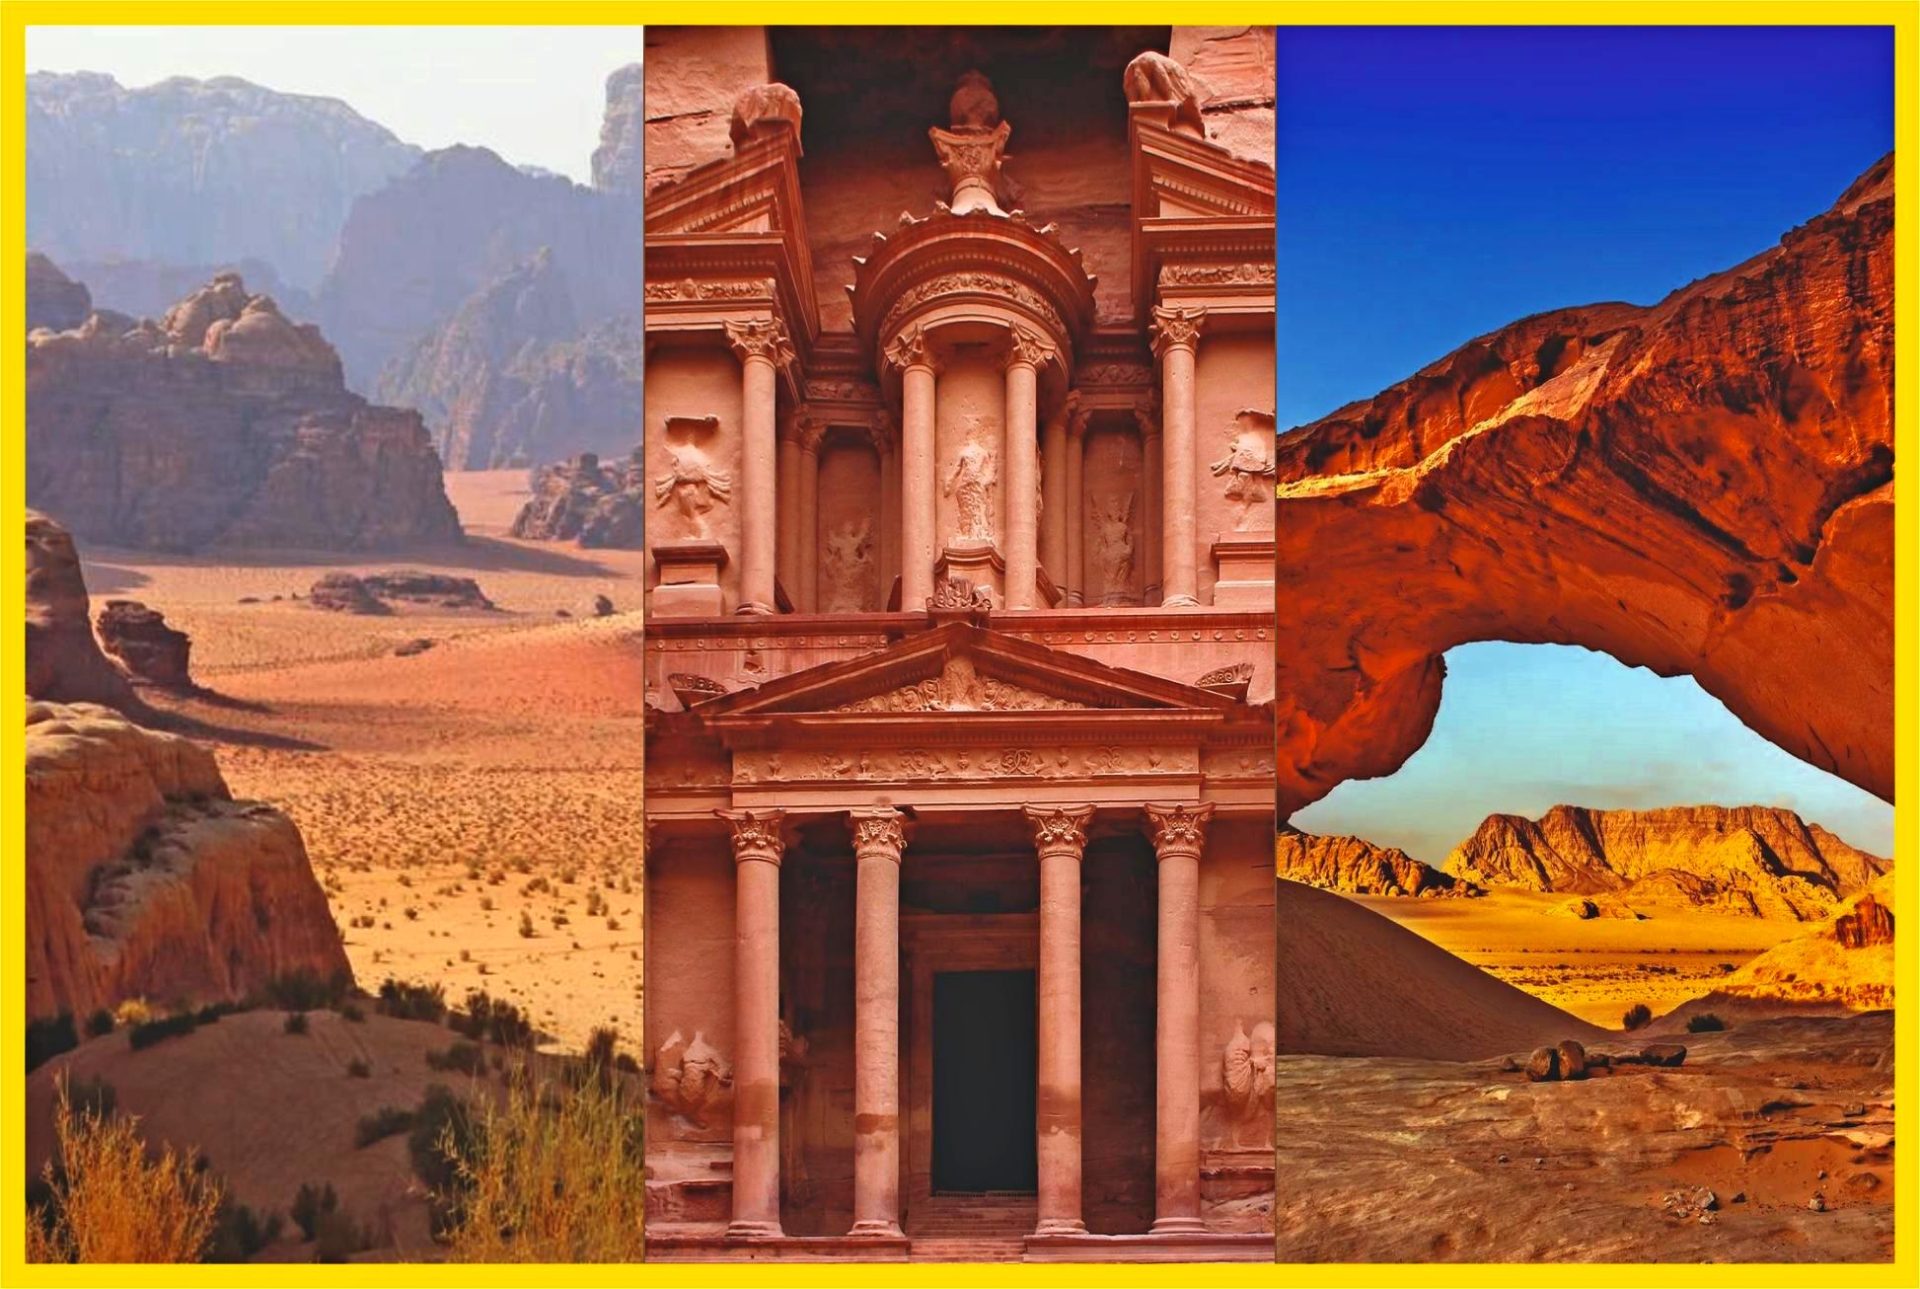 aqaba; group tour; individual tour; jordan; petra; tours; two-day tour; wadi rum; via jordan travel & tours; adventure; historical sites; middle east; travel; desert landscapes; culture; explore; sightseeing; adventure travel; historical tour; ancient wonders; guided tour; ancient civilizations; bucket list; red sea; bedouin experience; explore jordan; architectural marvels; natural beauty; historical landmarks; tourist attractions; travel agency; arabian adventure; outdoor adventure; vacation; archeological sites; mountain views; desert camping; camel ride; hiking; scenic views; canyon; rock formations; historical ruins; ancient city; heritage; local guide; travel itinerary; day trip; cultural experience; unique landscapes; rock formations; outdoor activities; off the beaten path; explore the unknown; hidden gems; travel with locals; cultural immersion; photography tour; luxury travel; nomadic lifestyle; star gazing; travel package; private guide; tailor-made tour; leisure travel; travel deals; accommodation; transportation; local cuisine; market visit; souvenir shopping.